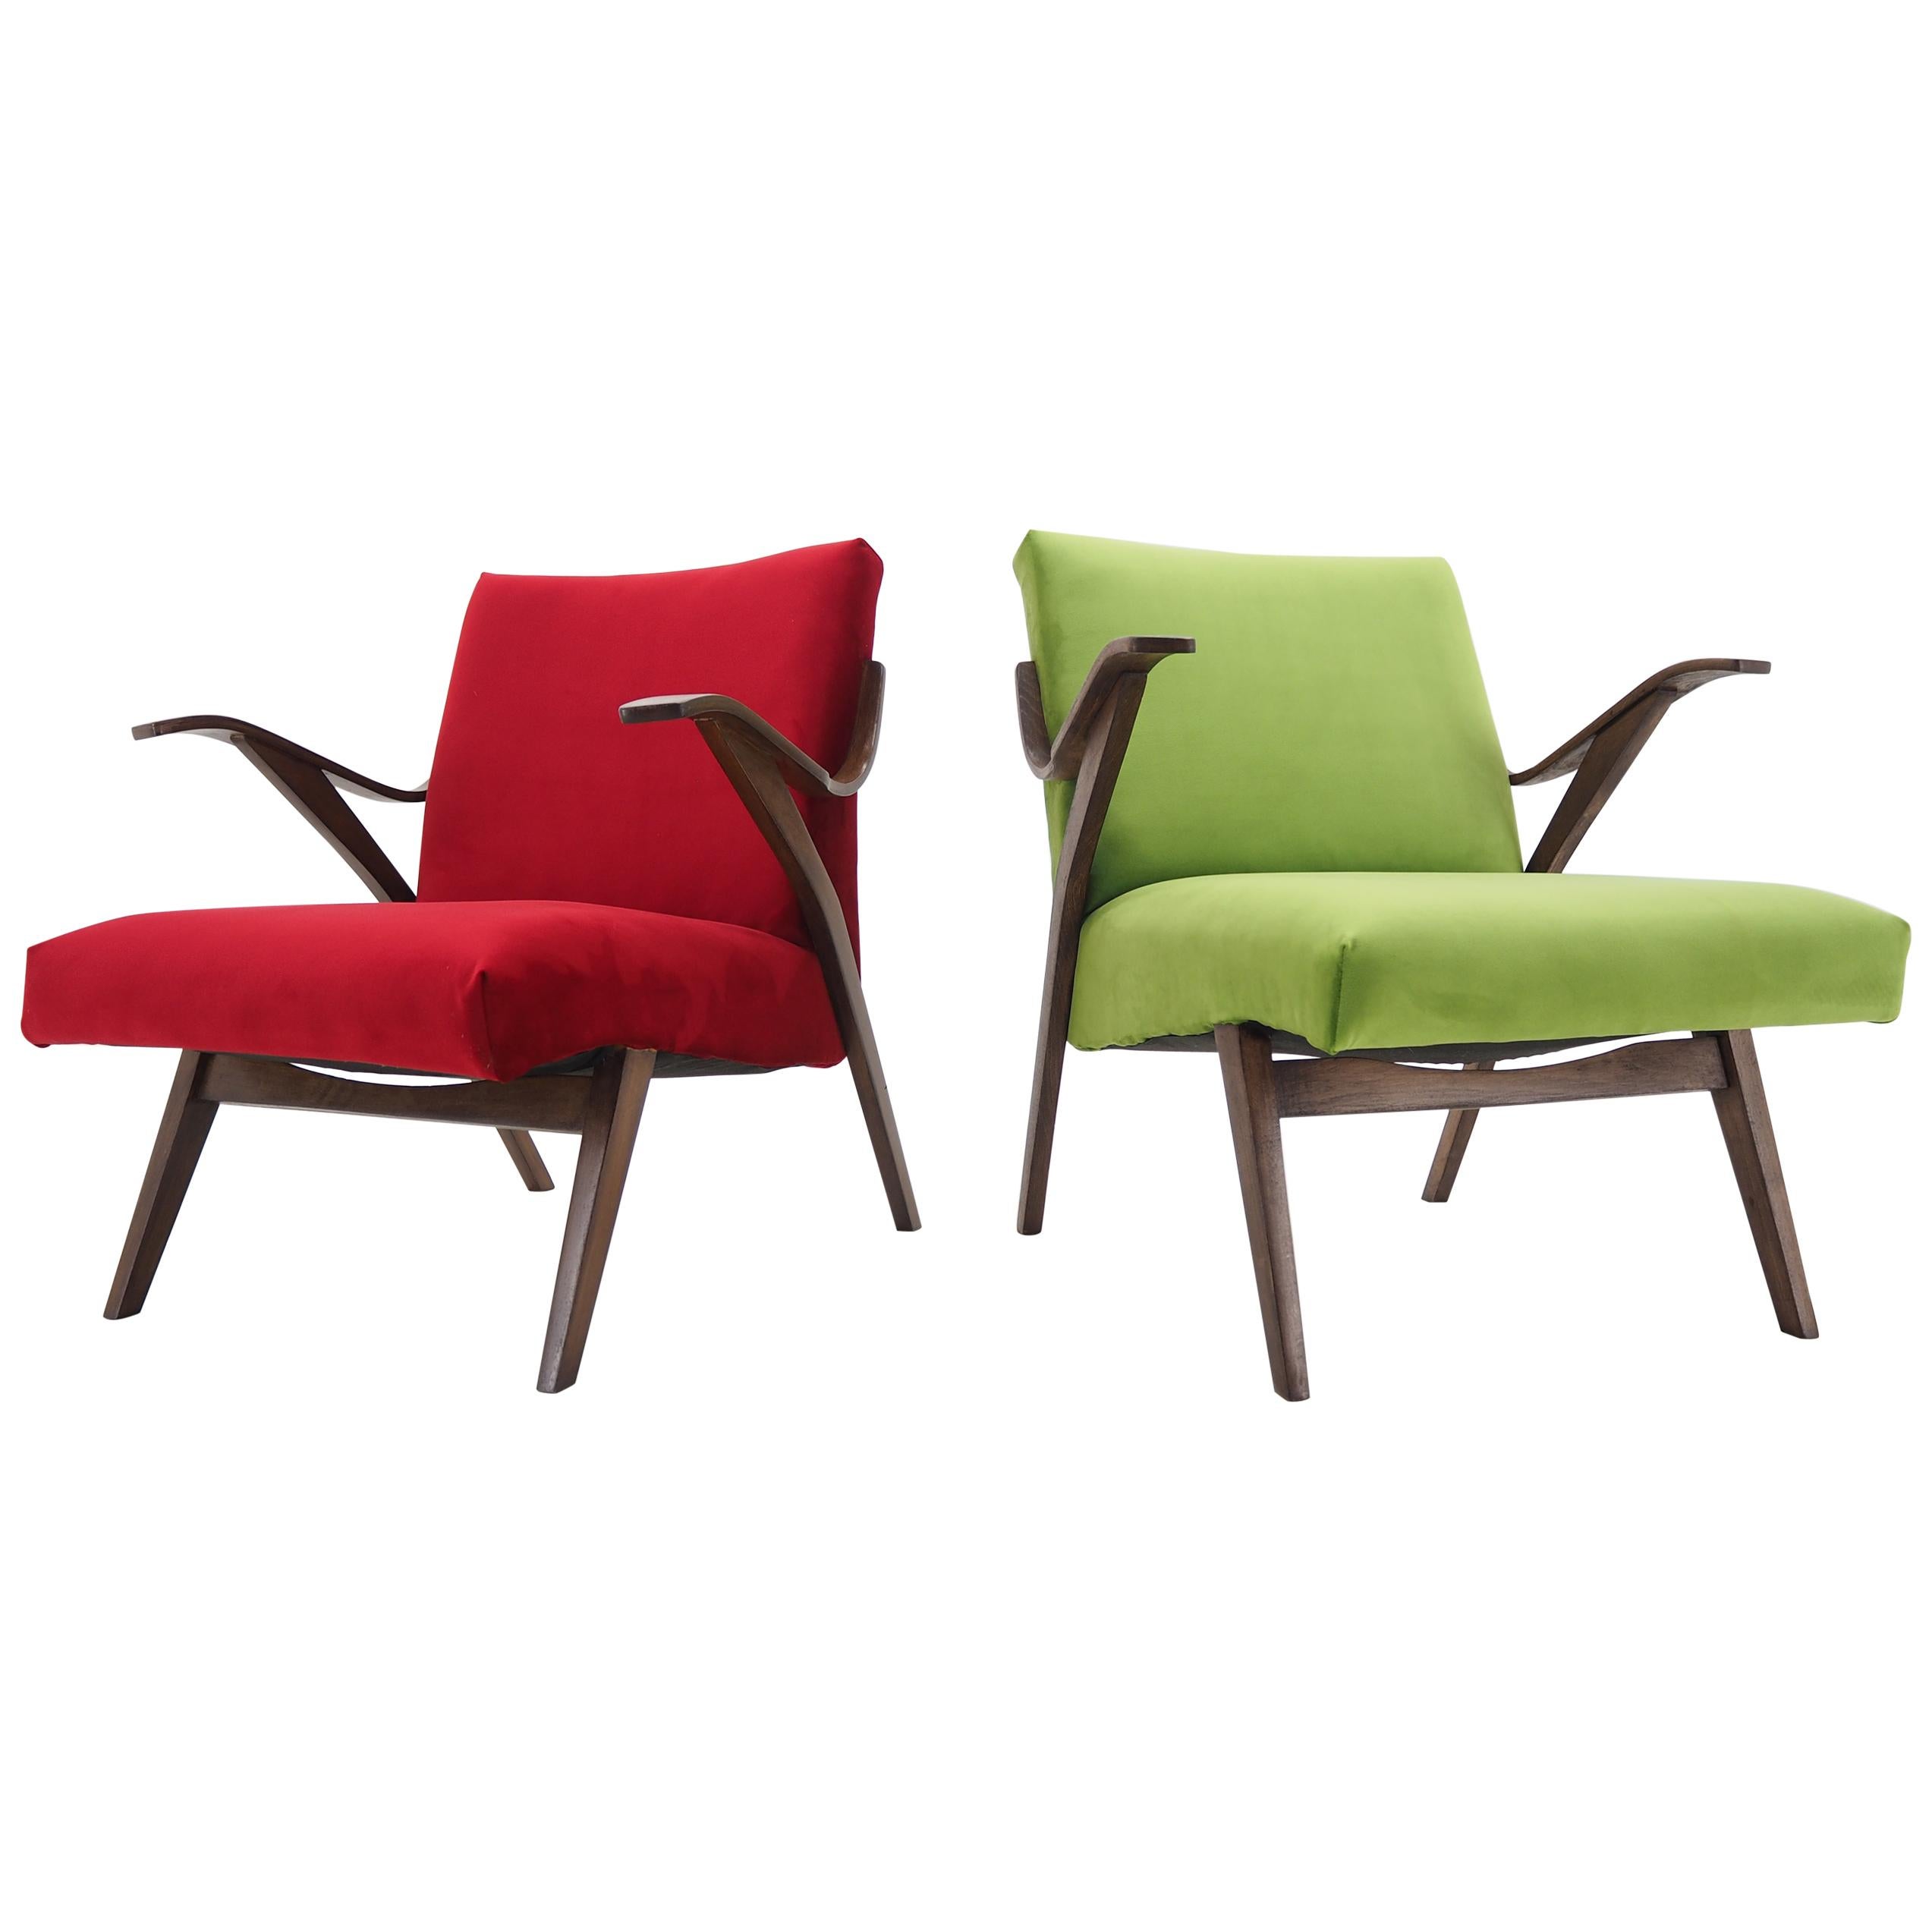 Pair of Armchairs in Brussels Style, by Tatra Pravenec, Czechoslovakia, 1960s